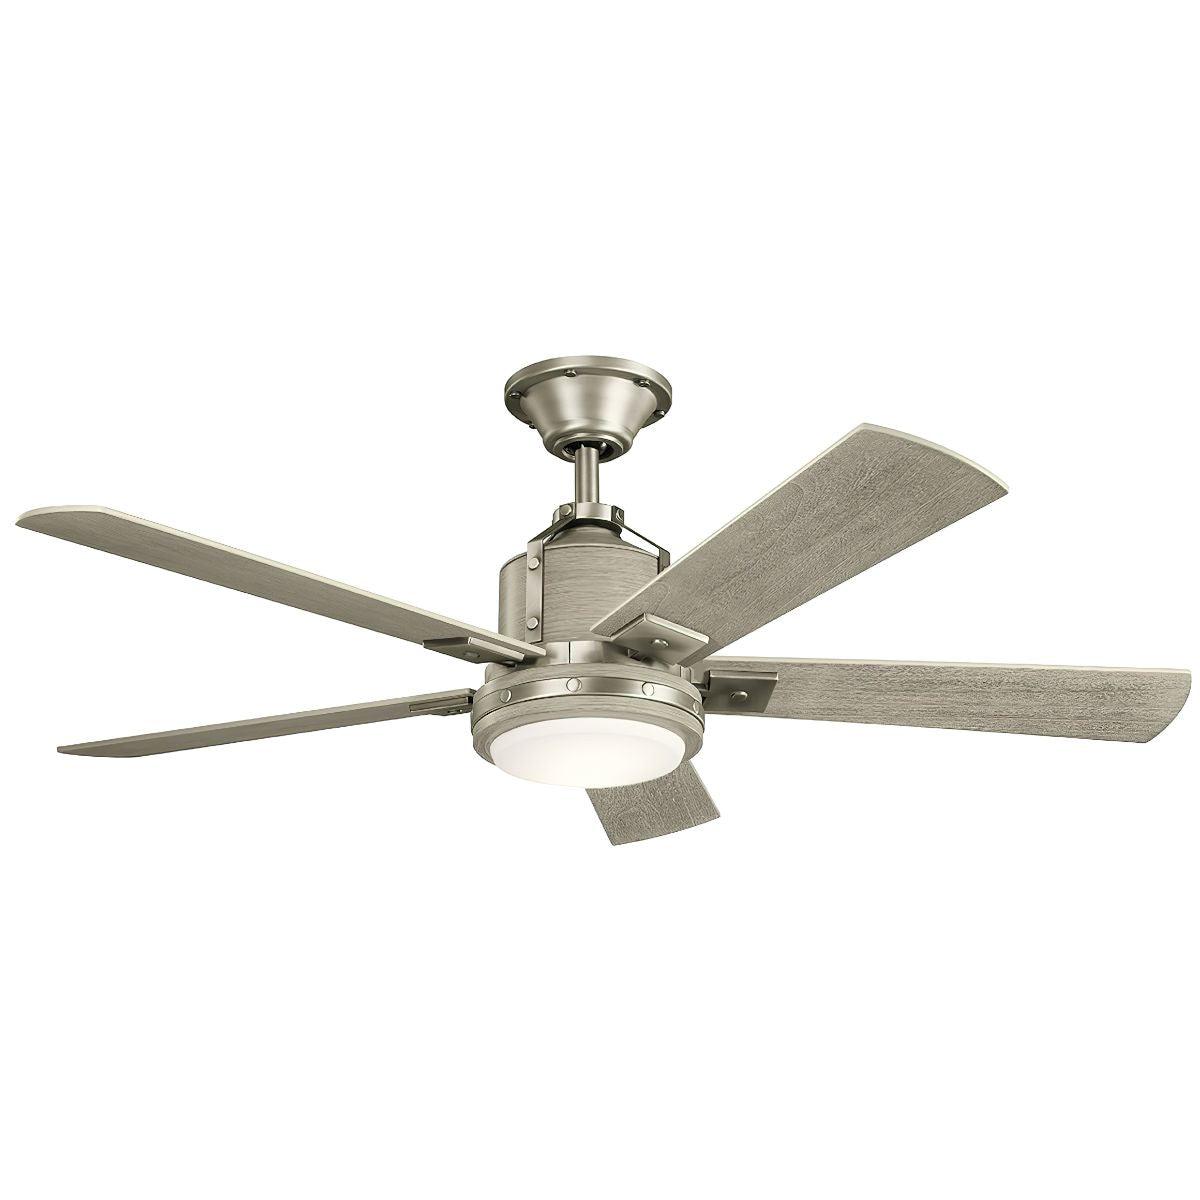 Colerne 52 Inch Rustic Ceiling Fan With Light, Wall Control Included - Bees Lighting